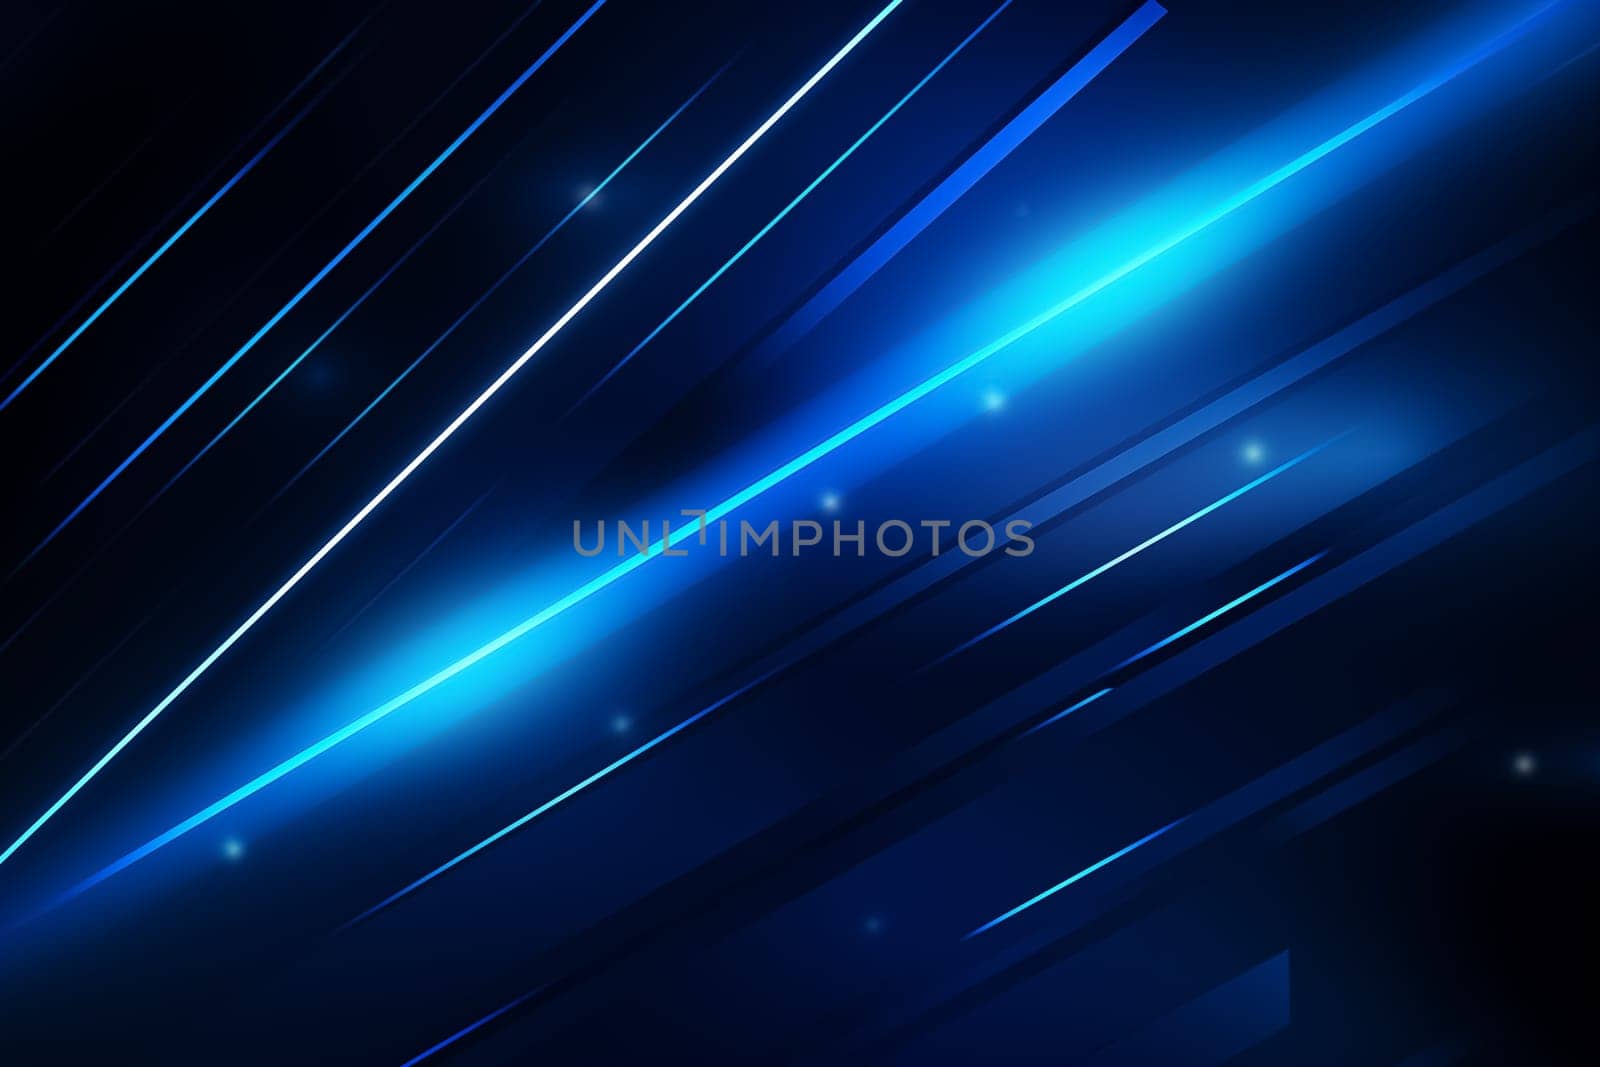 Blue abstract background with blue glowing geometric lines. Modern shiny blue diagonal rounded lines pattern. Futuristic technology concept. Suit for poster, banner, brochure, corporate, website. High quality photo